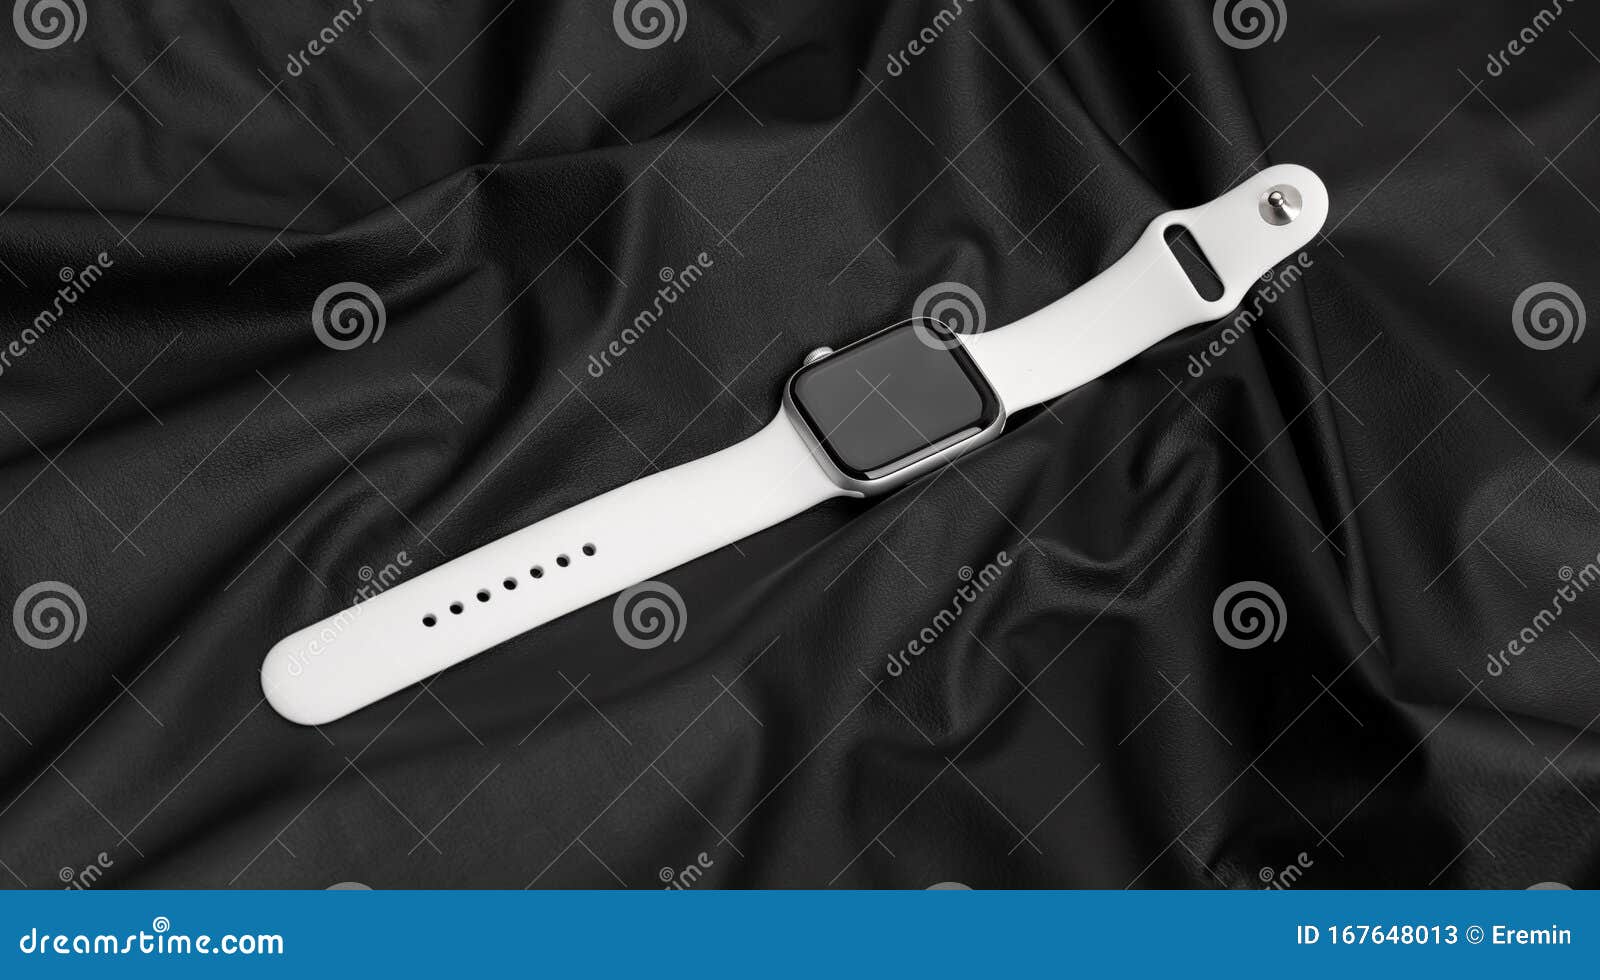 Apple Series 5 Silver Aluminum Case with Sport Band White Color. Editorial Stock Photo Image of innovation, 167648013